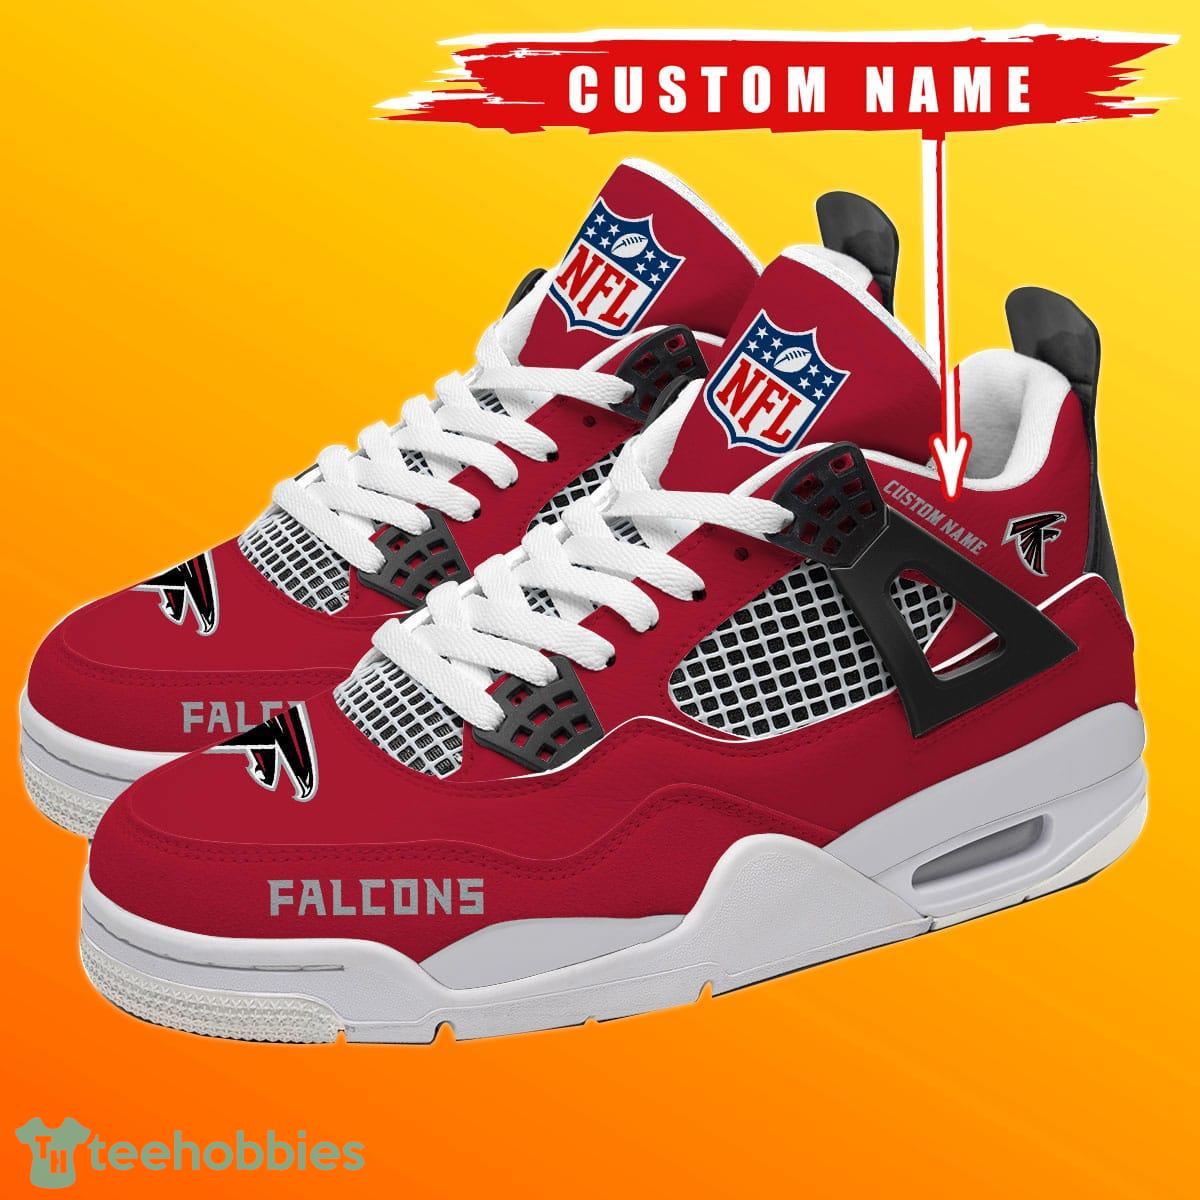 Atlanta Falcons Personalized Name NFL Air Jordan 4 Trending Sneaker Special Gift For Fans Product Photo 1